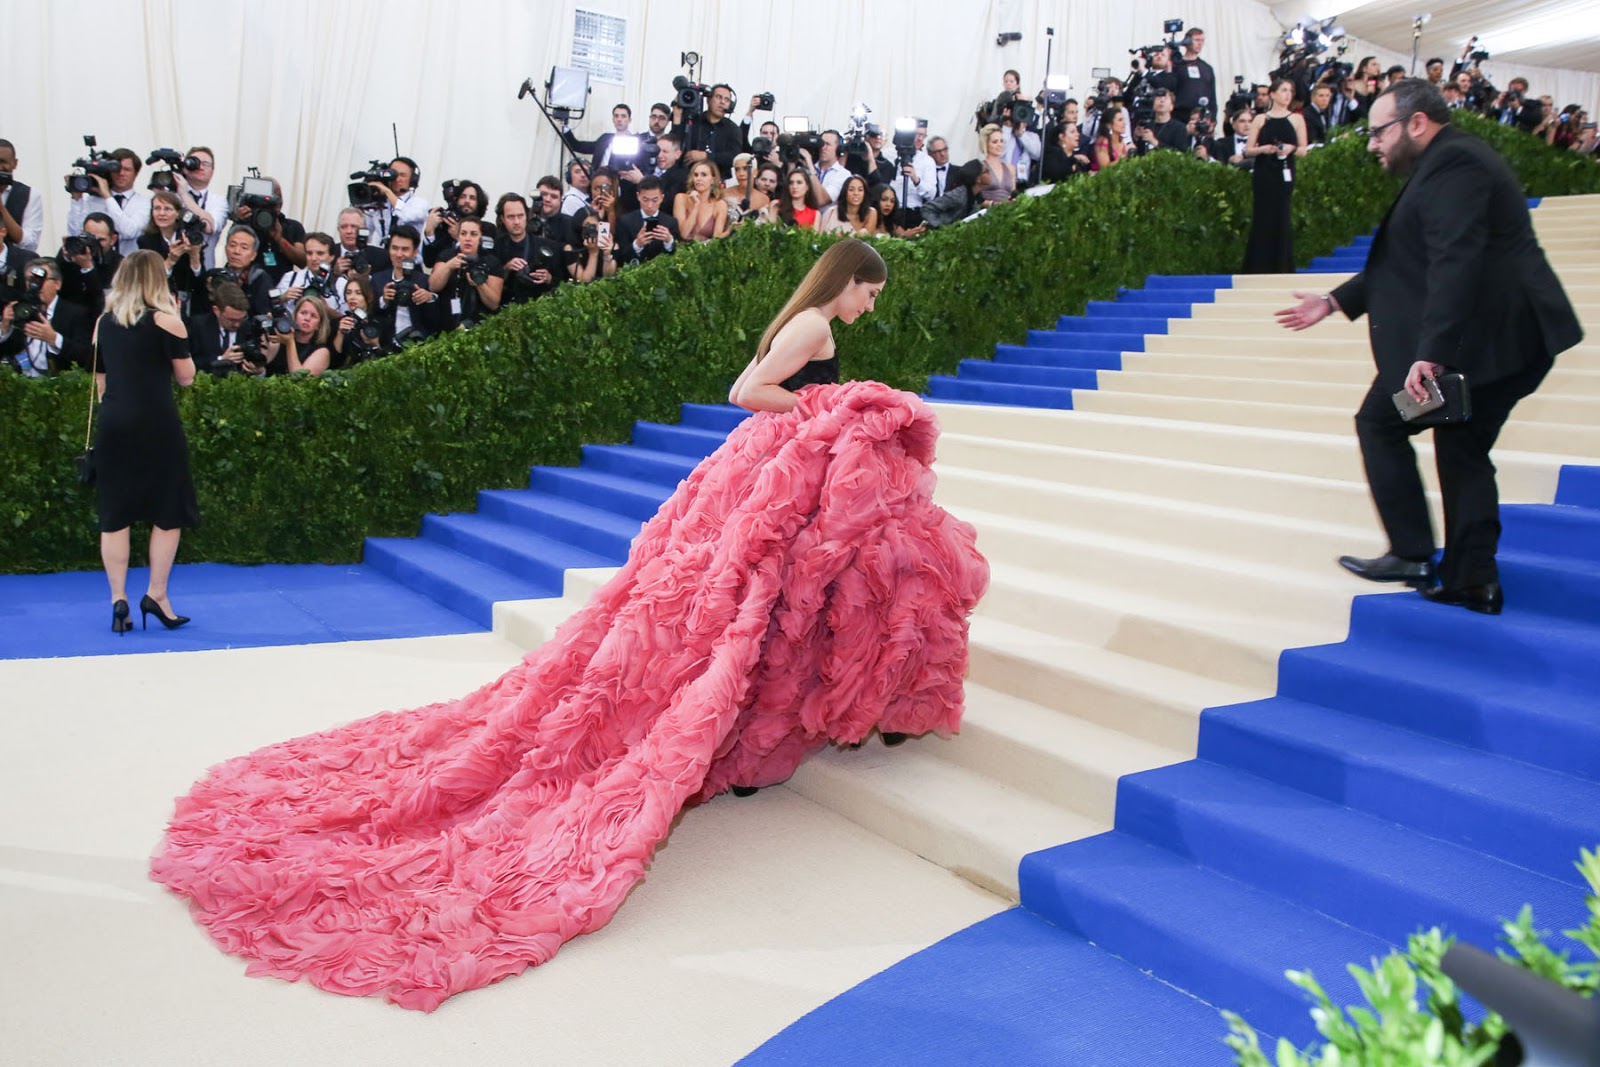 The GLAMOROUS: AT THE MET GALA Part II